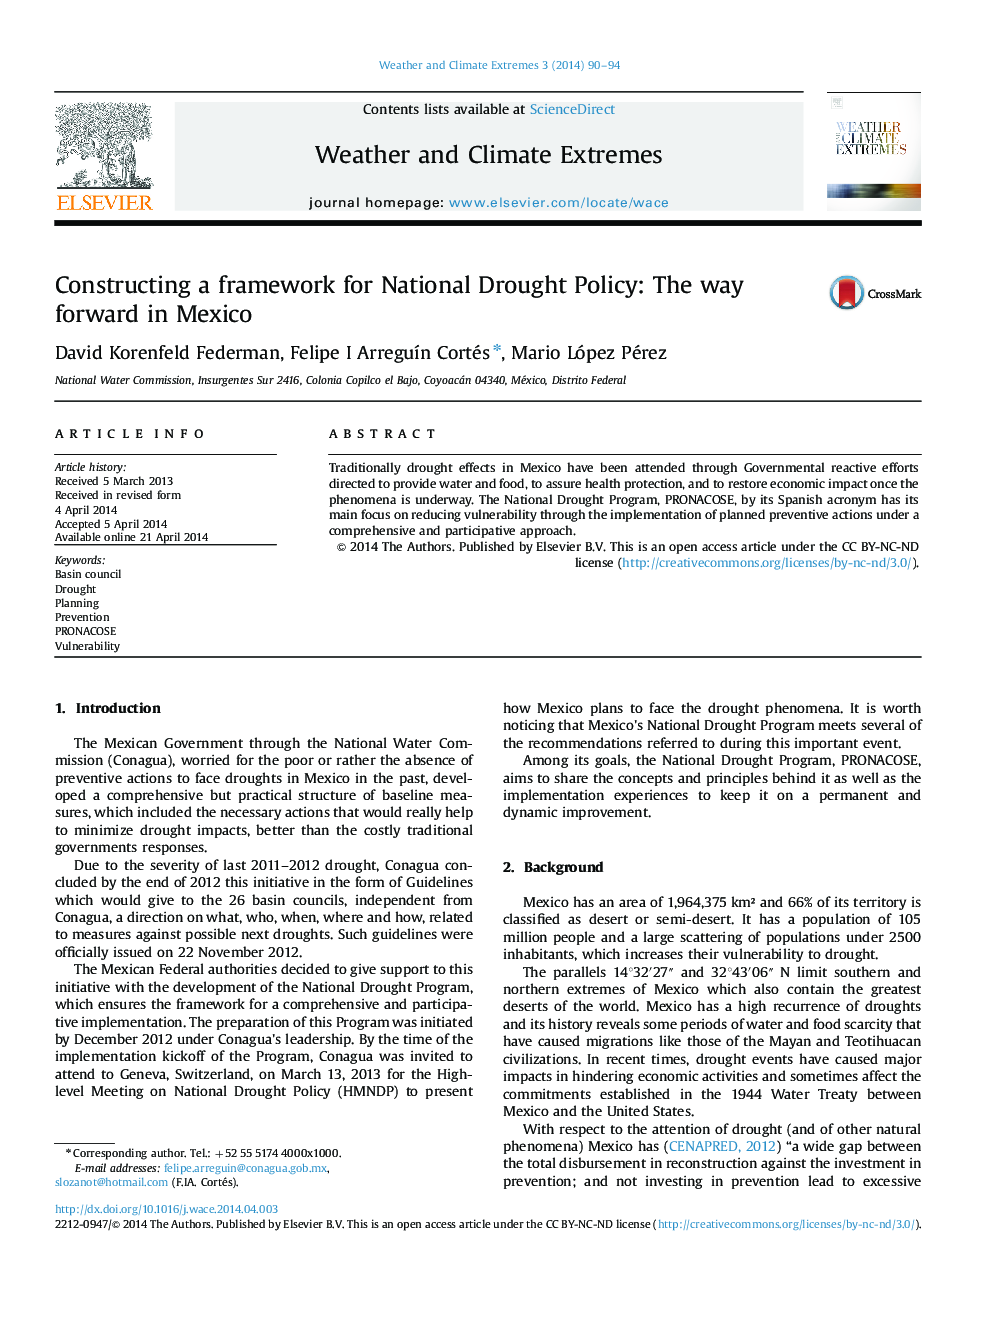 Constructing a framework for National Drought Policy: The way forward in Mexico